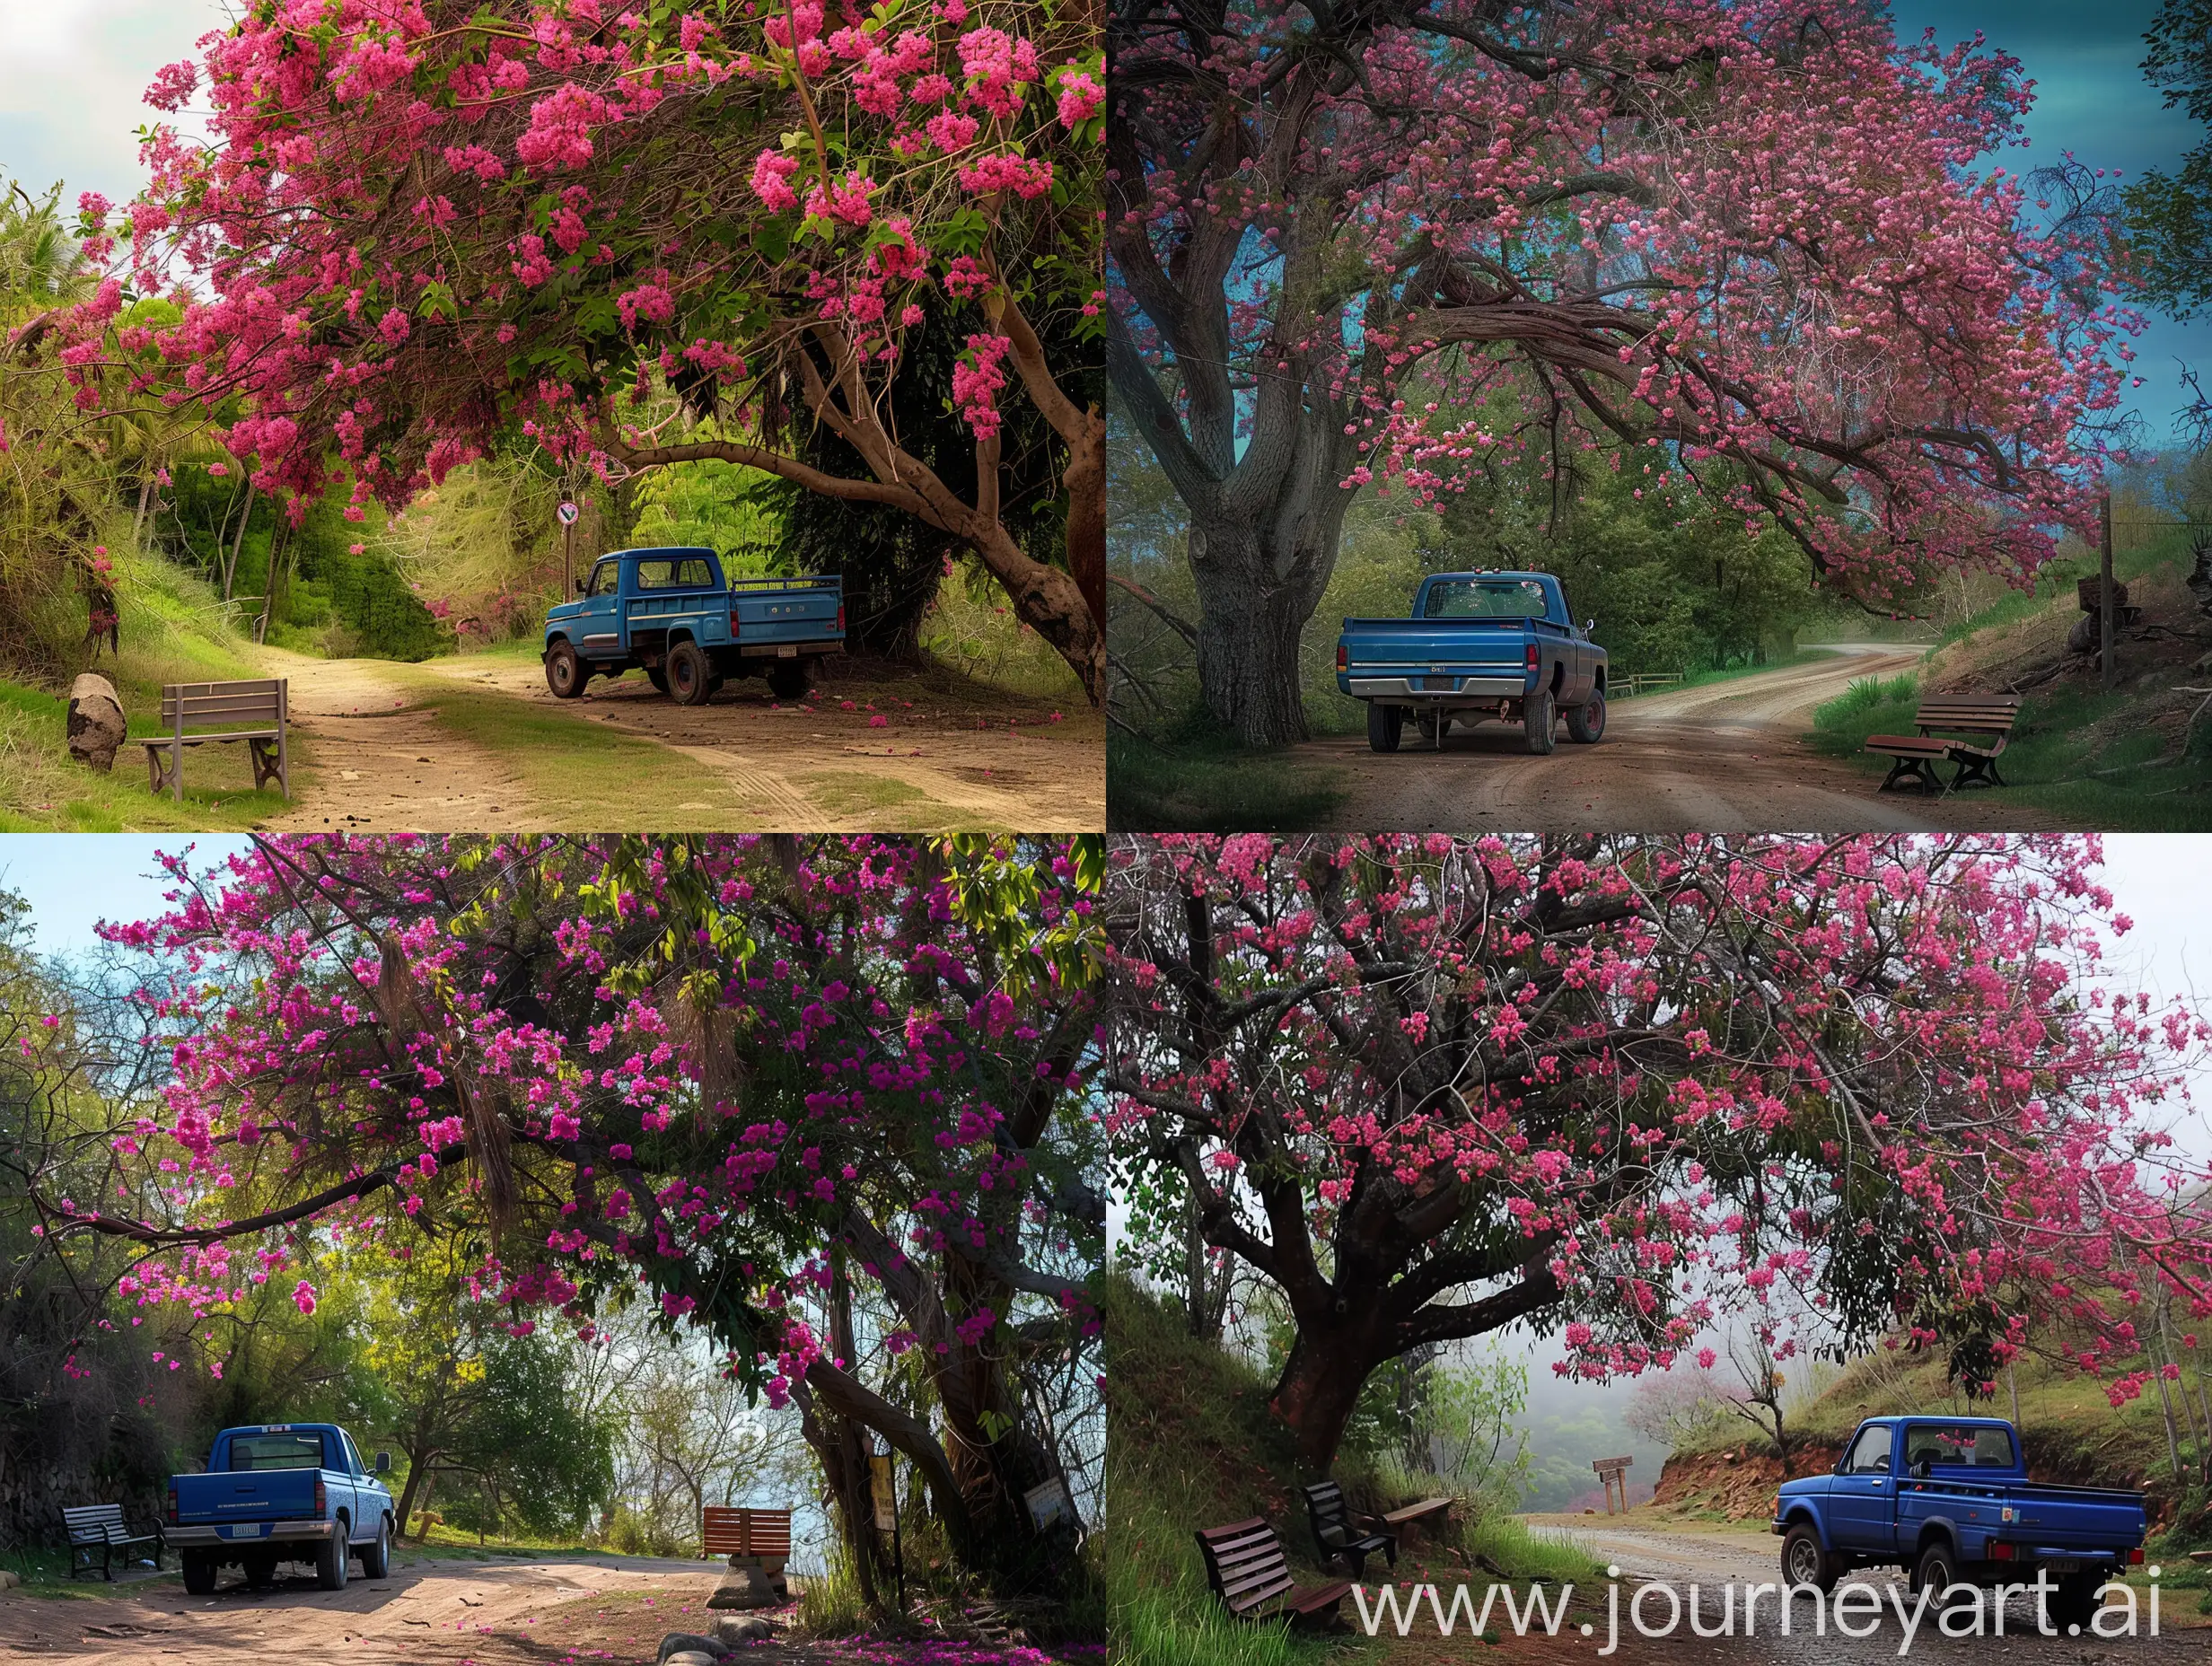 Blue-Truck-Parked-on-Dirt-Road-Under-Pink-Flowering-Tree-with-Nearby-Bench